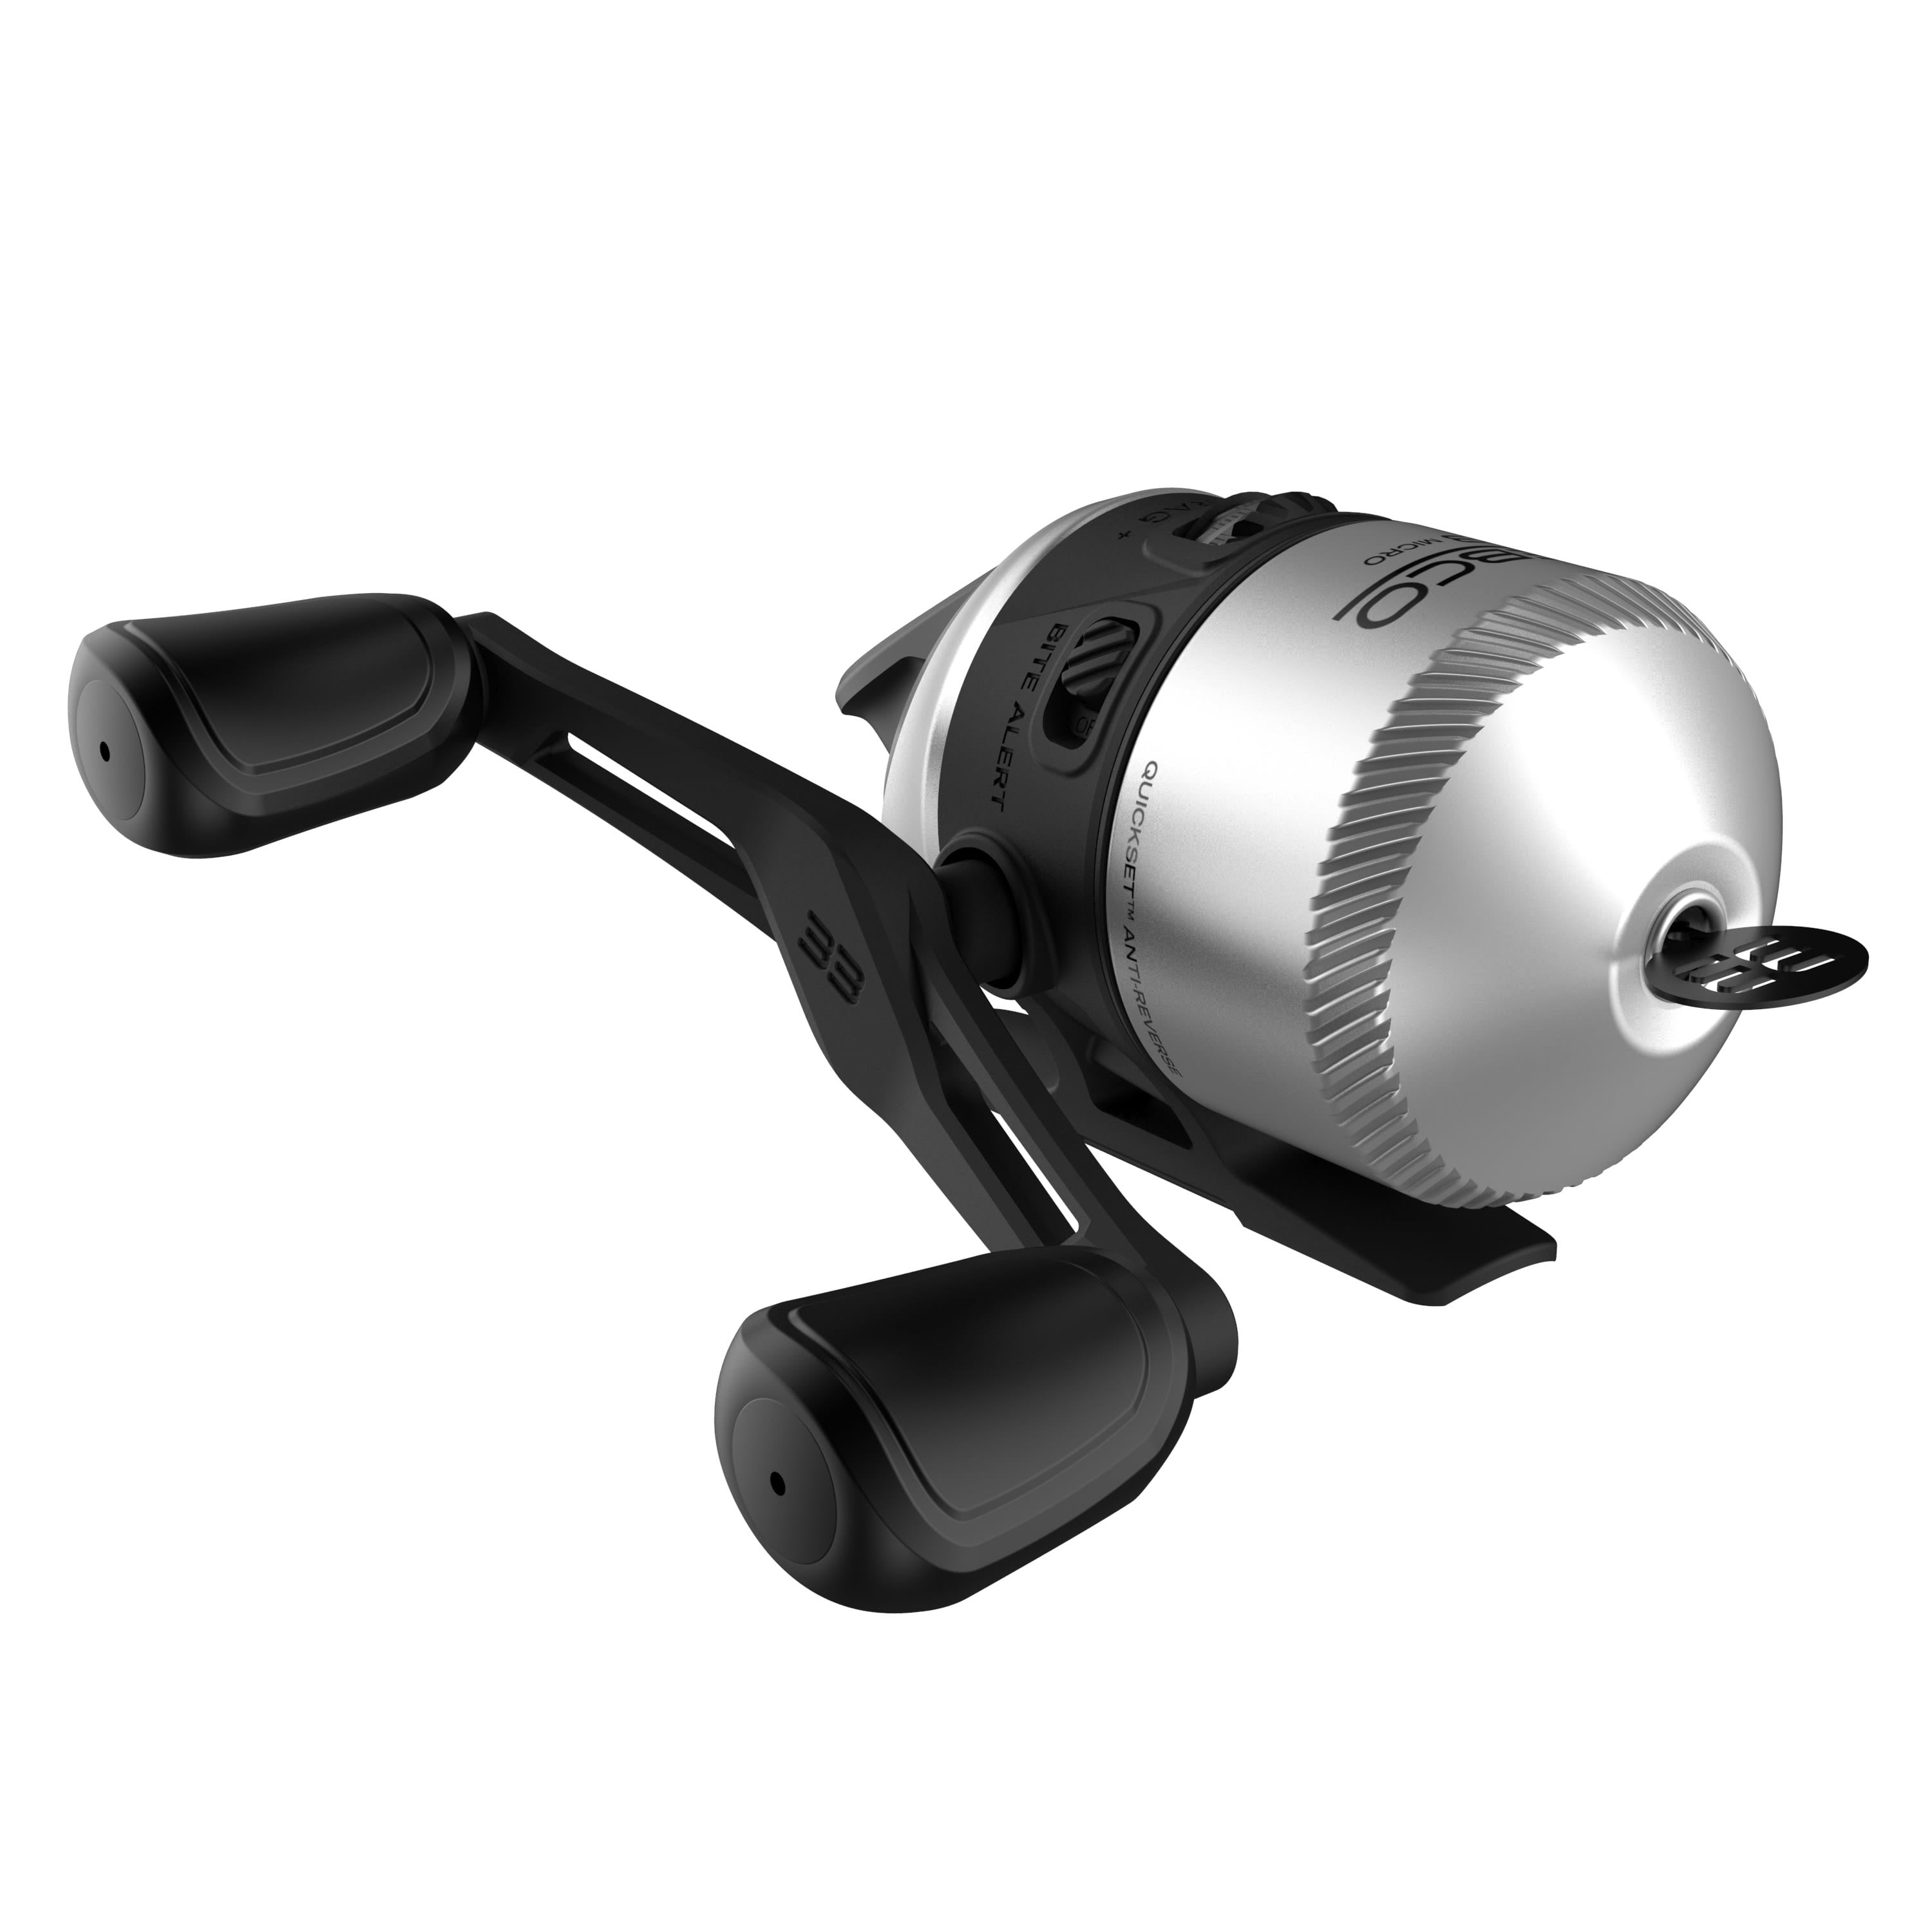 Zebco 33 Micro Spincast Reel and 2-Piece Fishing Rod Combo, 4.5-Foot Rod  with Bonus Tackle Pack, Quickset Anti-Reverse Fishing Reel with Bite Alert